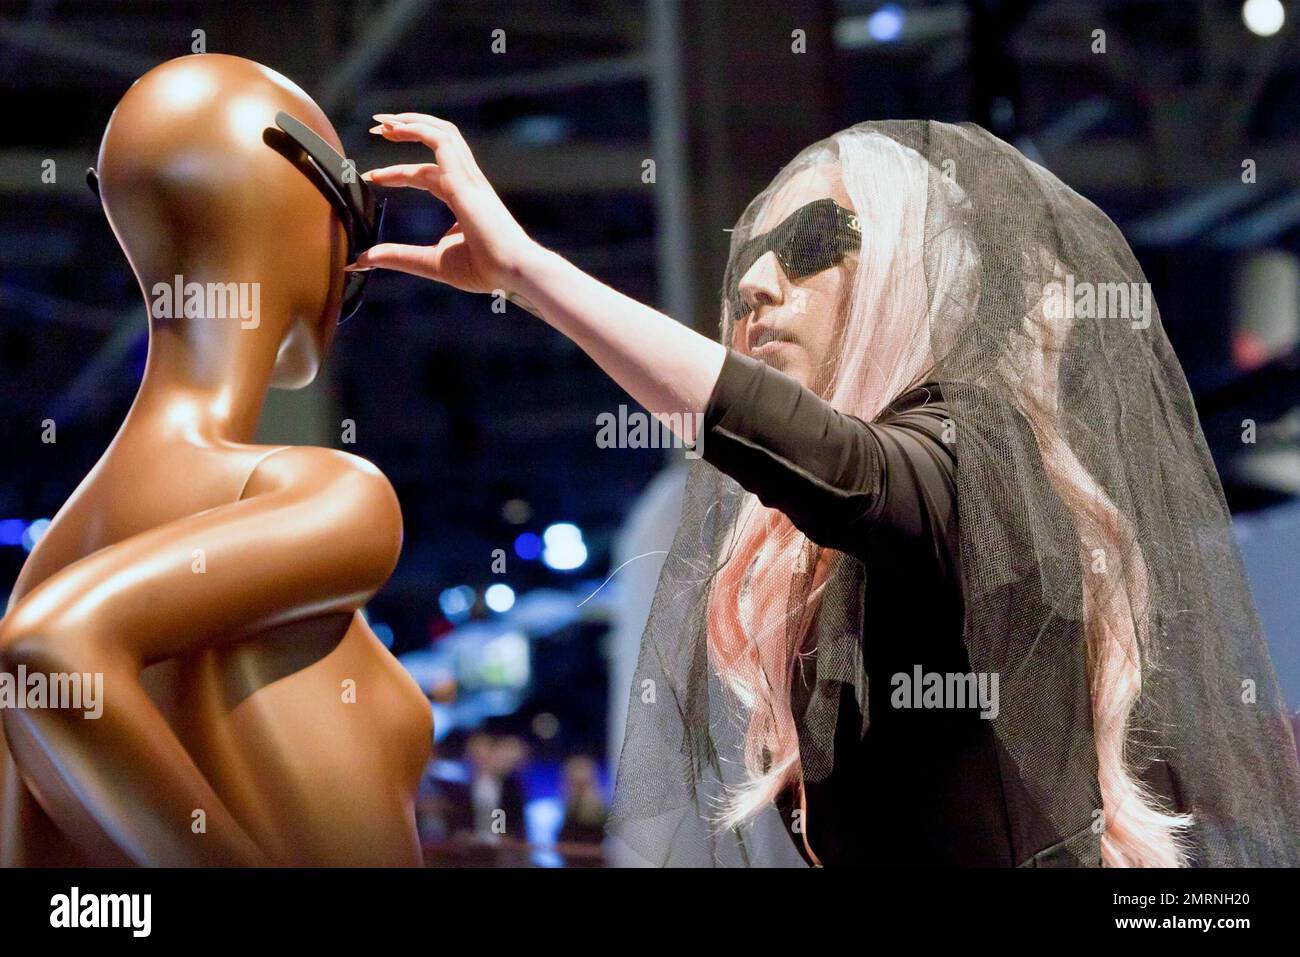 Lady Gaga wears a black veil, Chanel sunglasses and a corset over